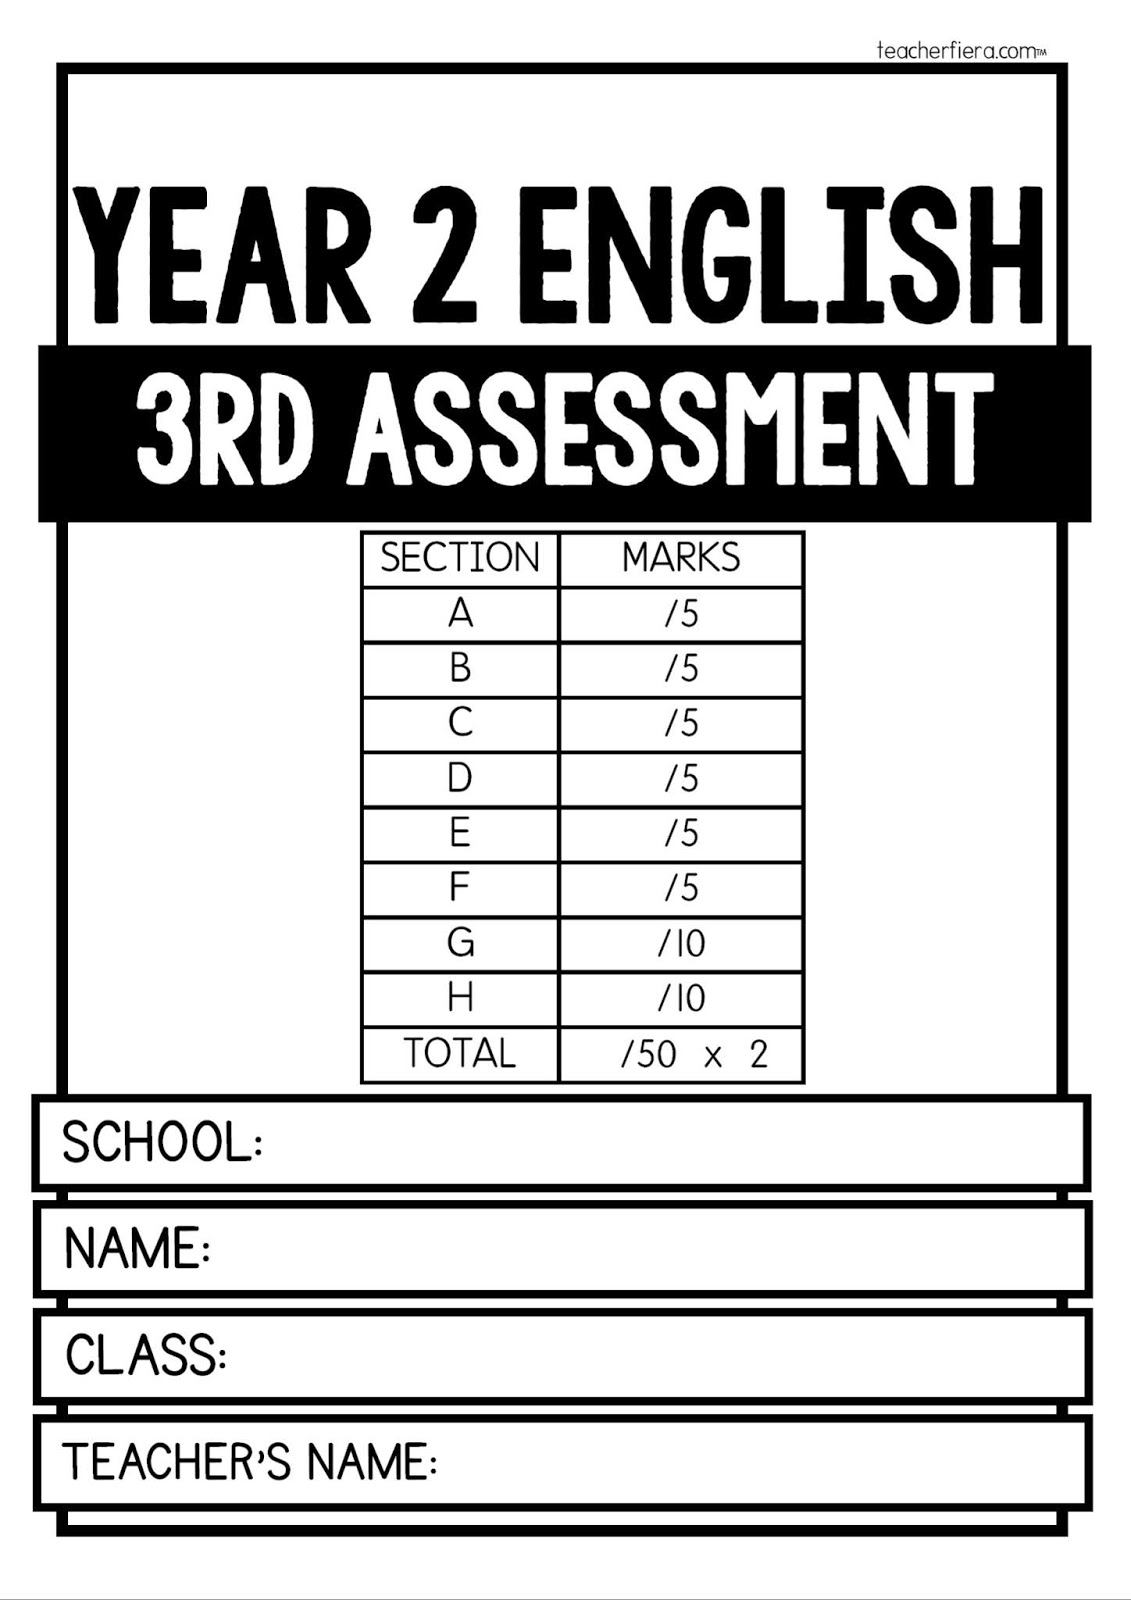 english-assessment-test-1-pdf-file-made-by-teachers